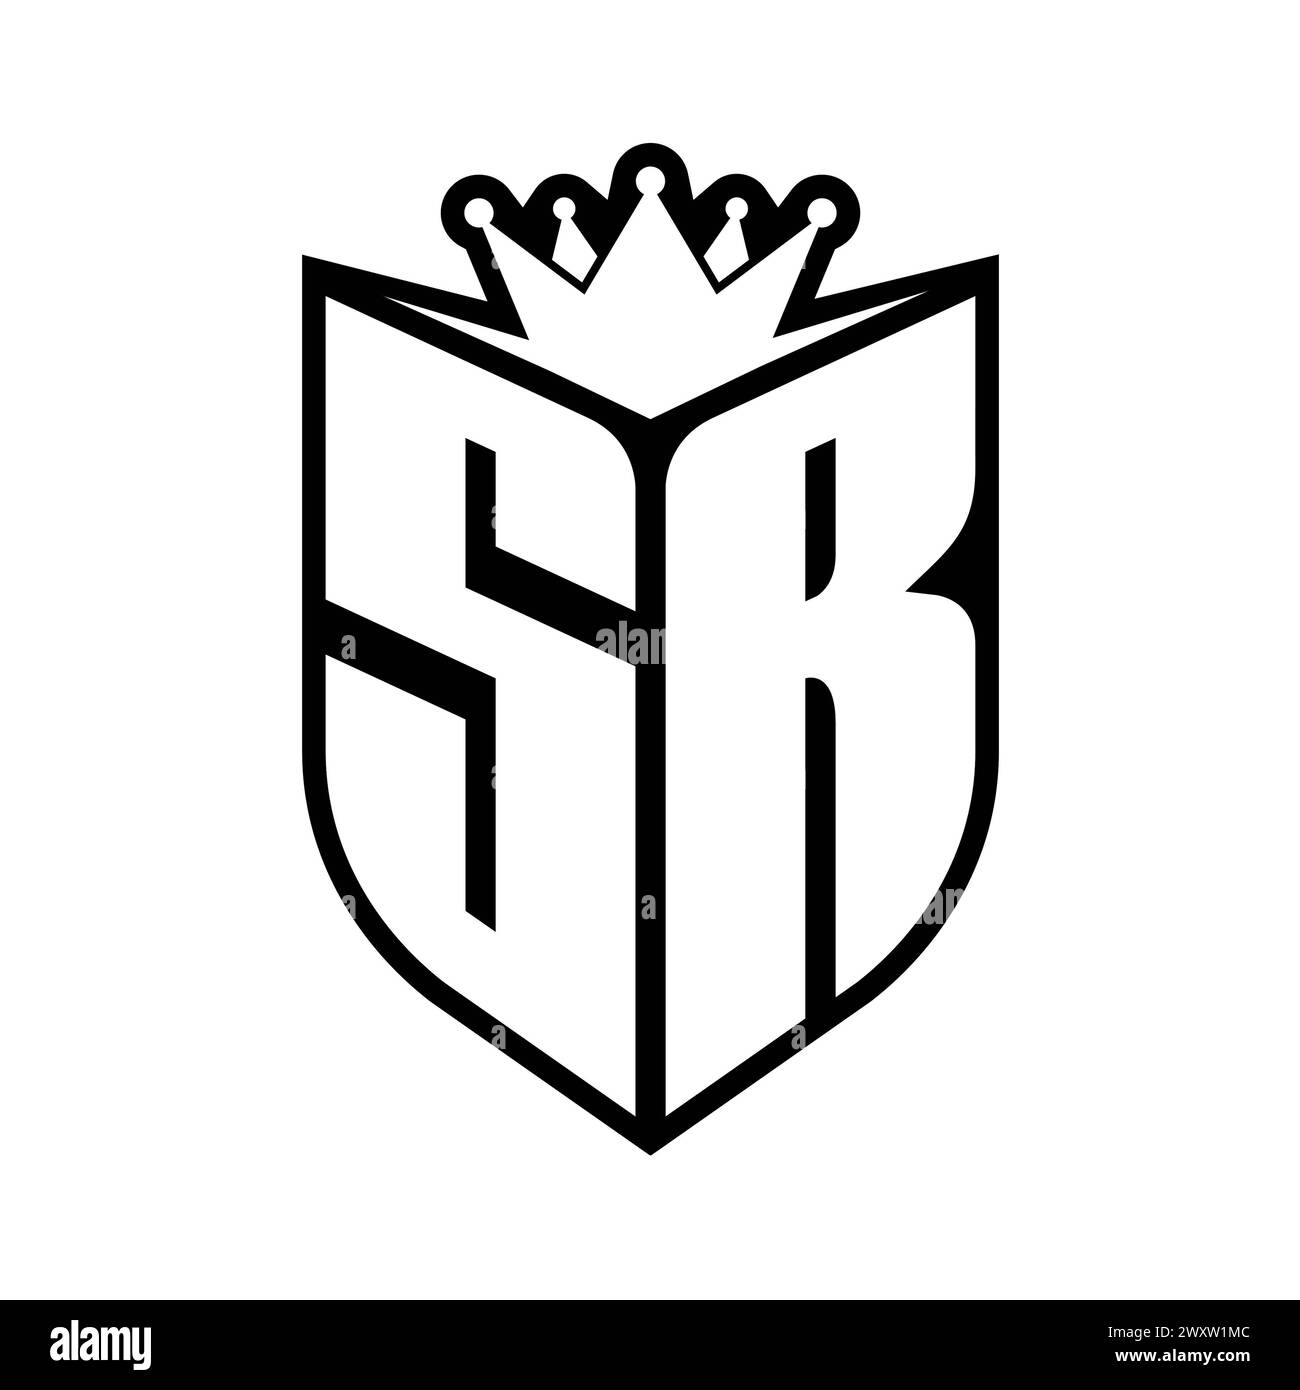 SR Letter bold monogram with shield shape and sharp crown inside shield black and white color design template Stock Photo